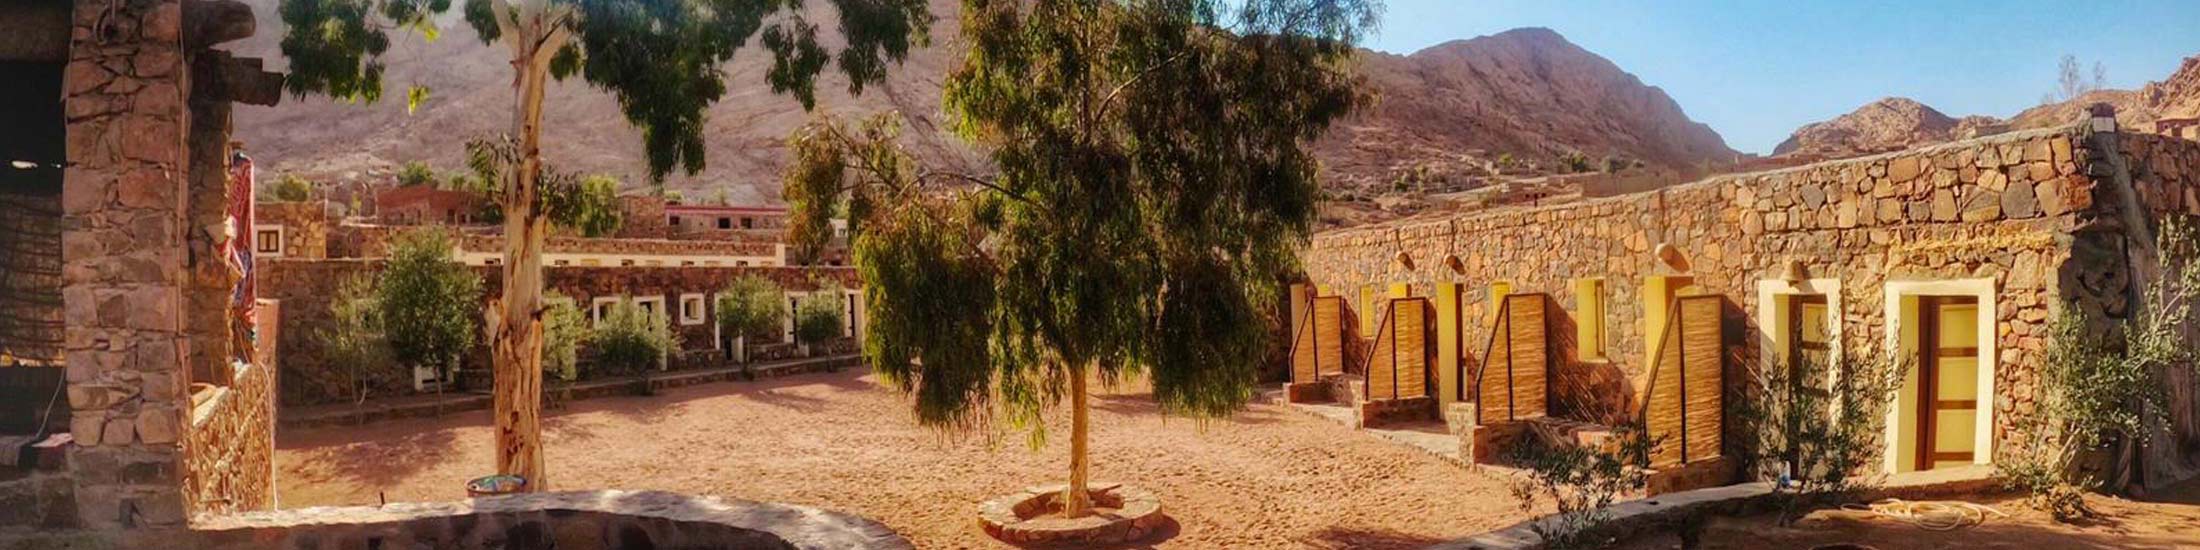 Sheikh Mousa Bedouin Camp and Guest House